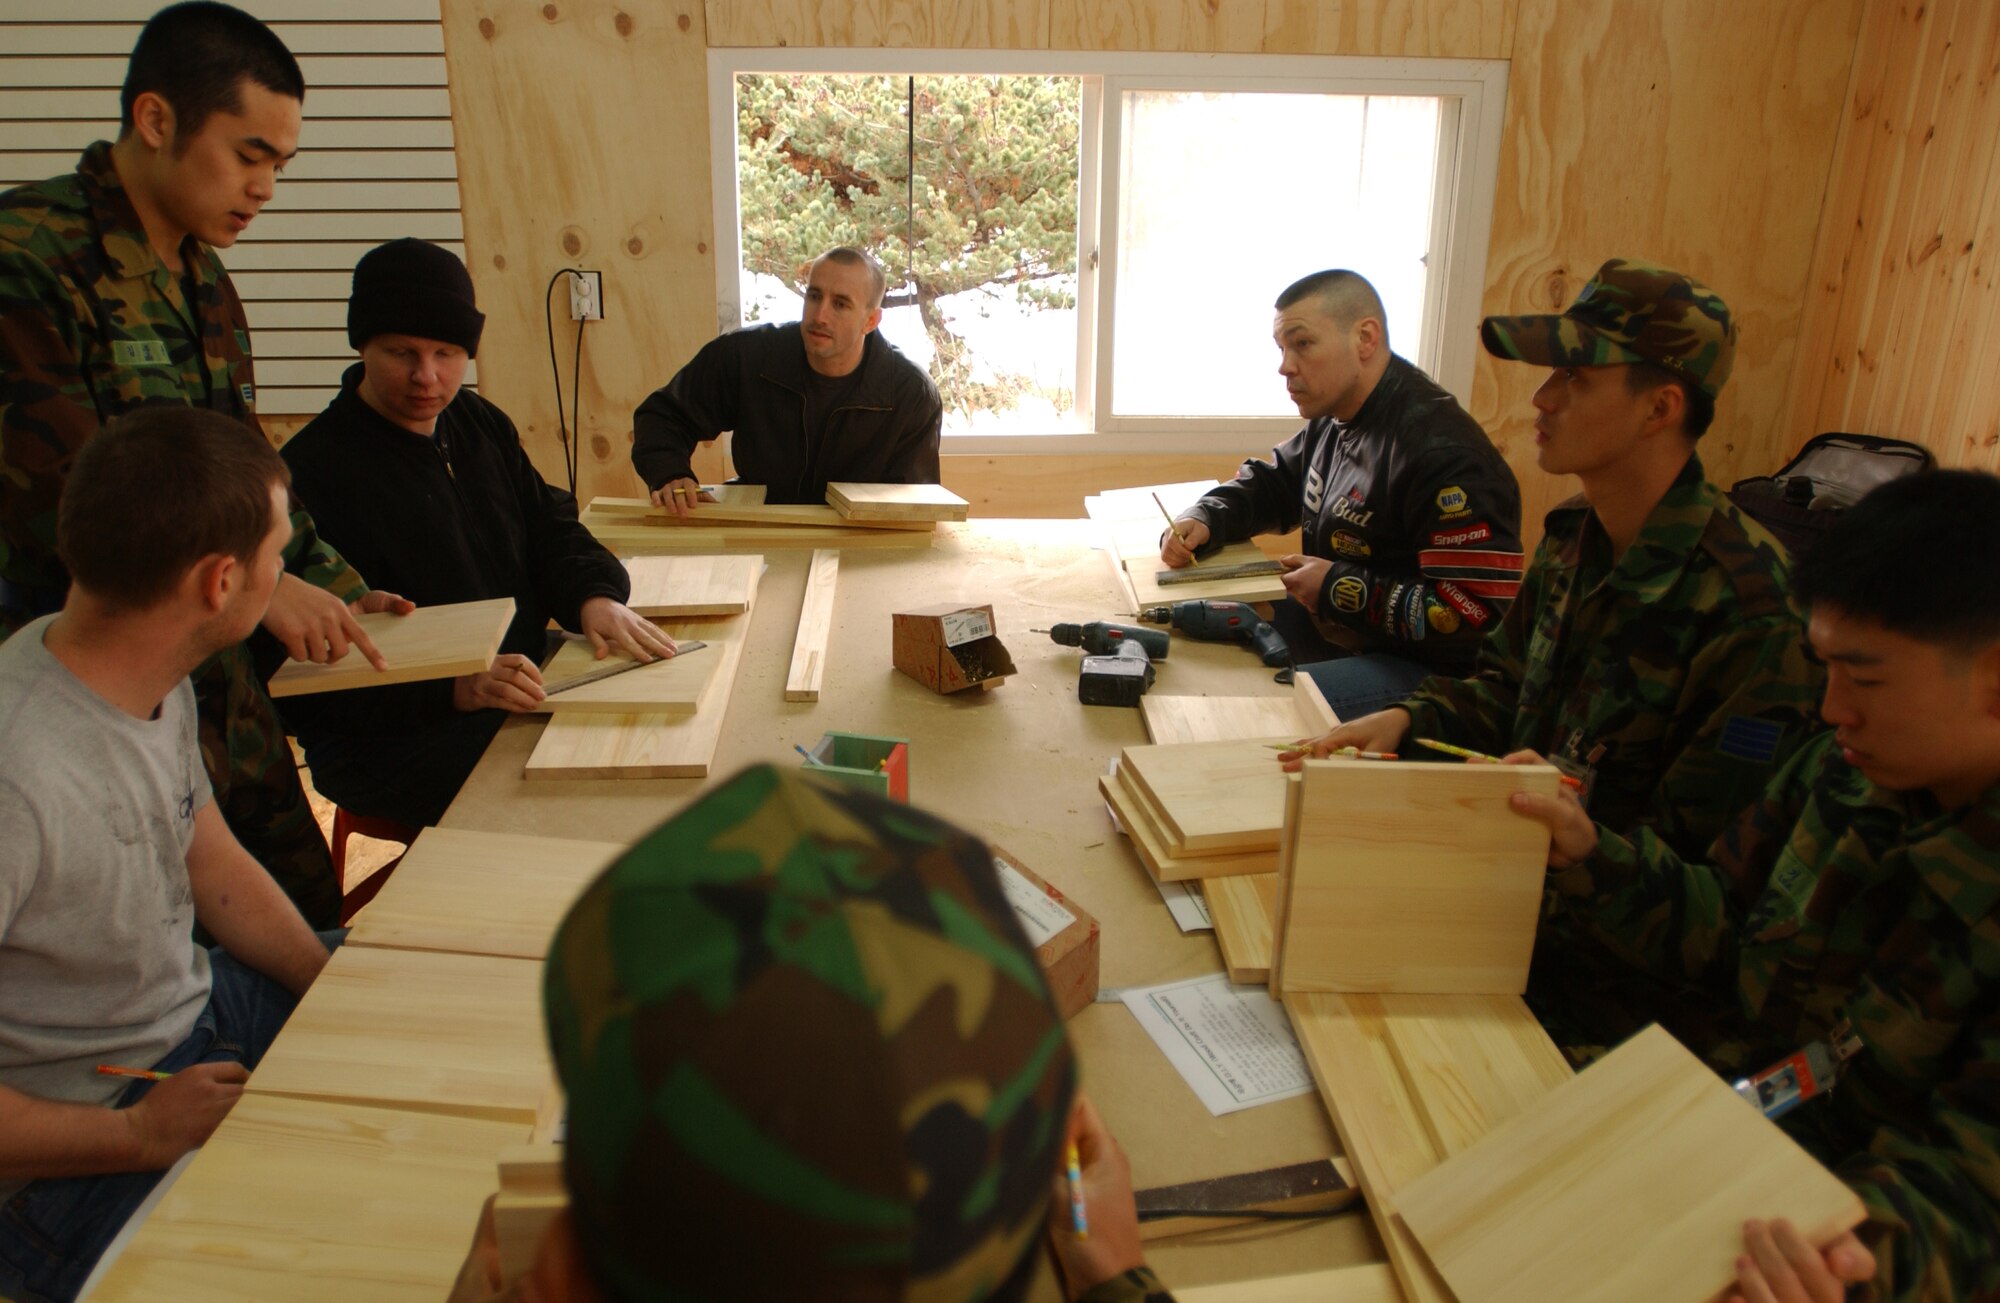 OSAN AIR BASE, Republic of Korea --  Senior Airman Kim, Jun-Yong, Republic of Korea Air Force public affairs office, helps members from the 51st Fighter Wing and 7th Air Force with a wood working project Saturday. The group went to the Wootdali Cultural Center near Osan at the invitation of the ROK Air Force Operations Command as part of the Good Neighbor Program. (U.S. Air Force photo by Airman Jason Epley)